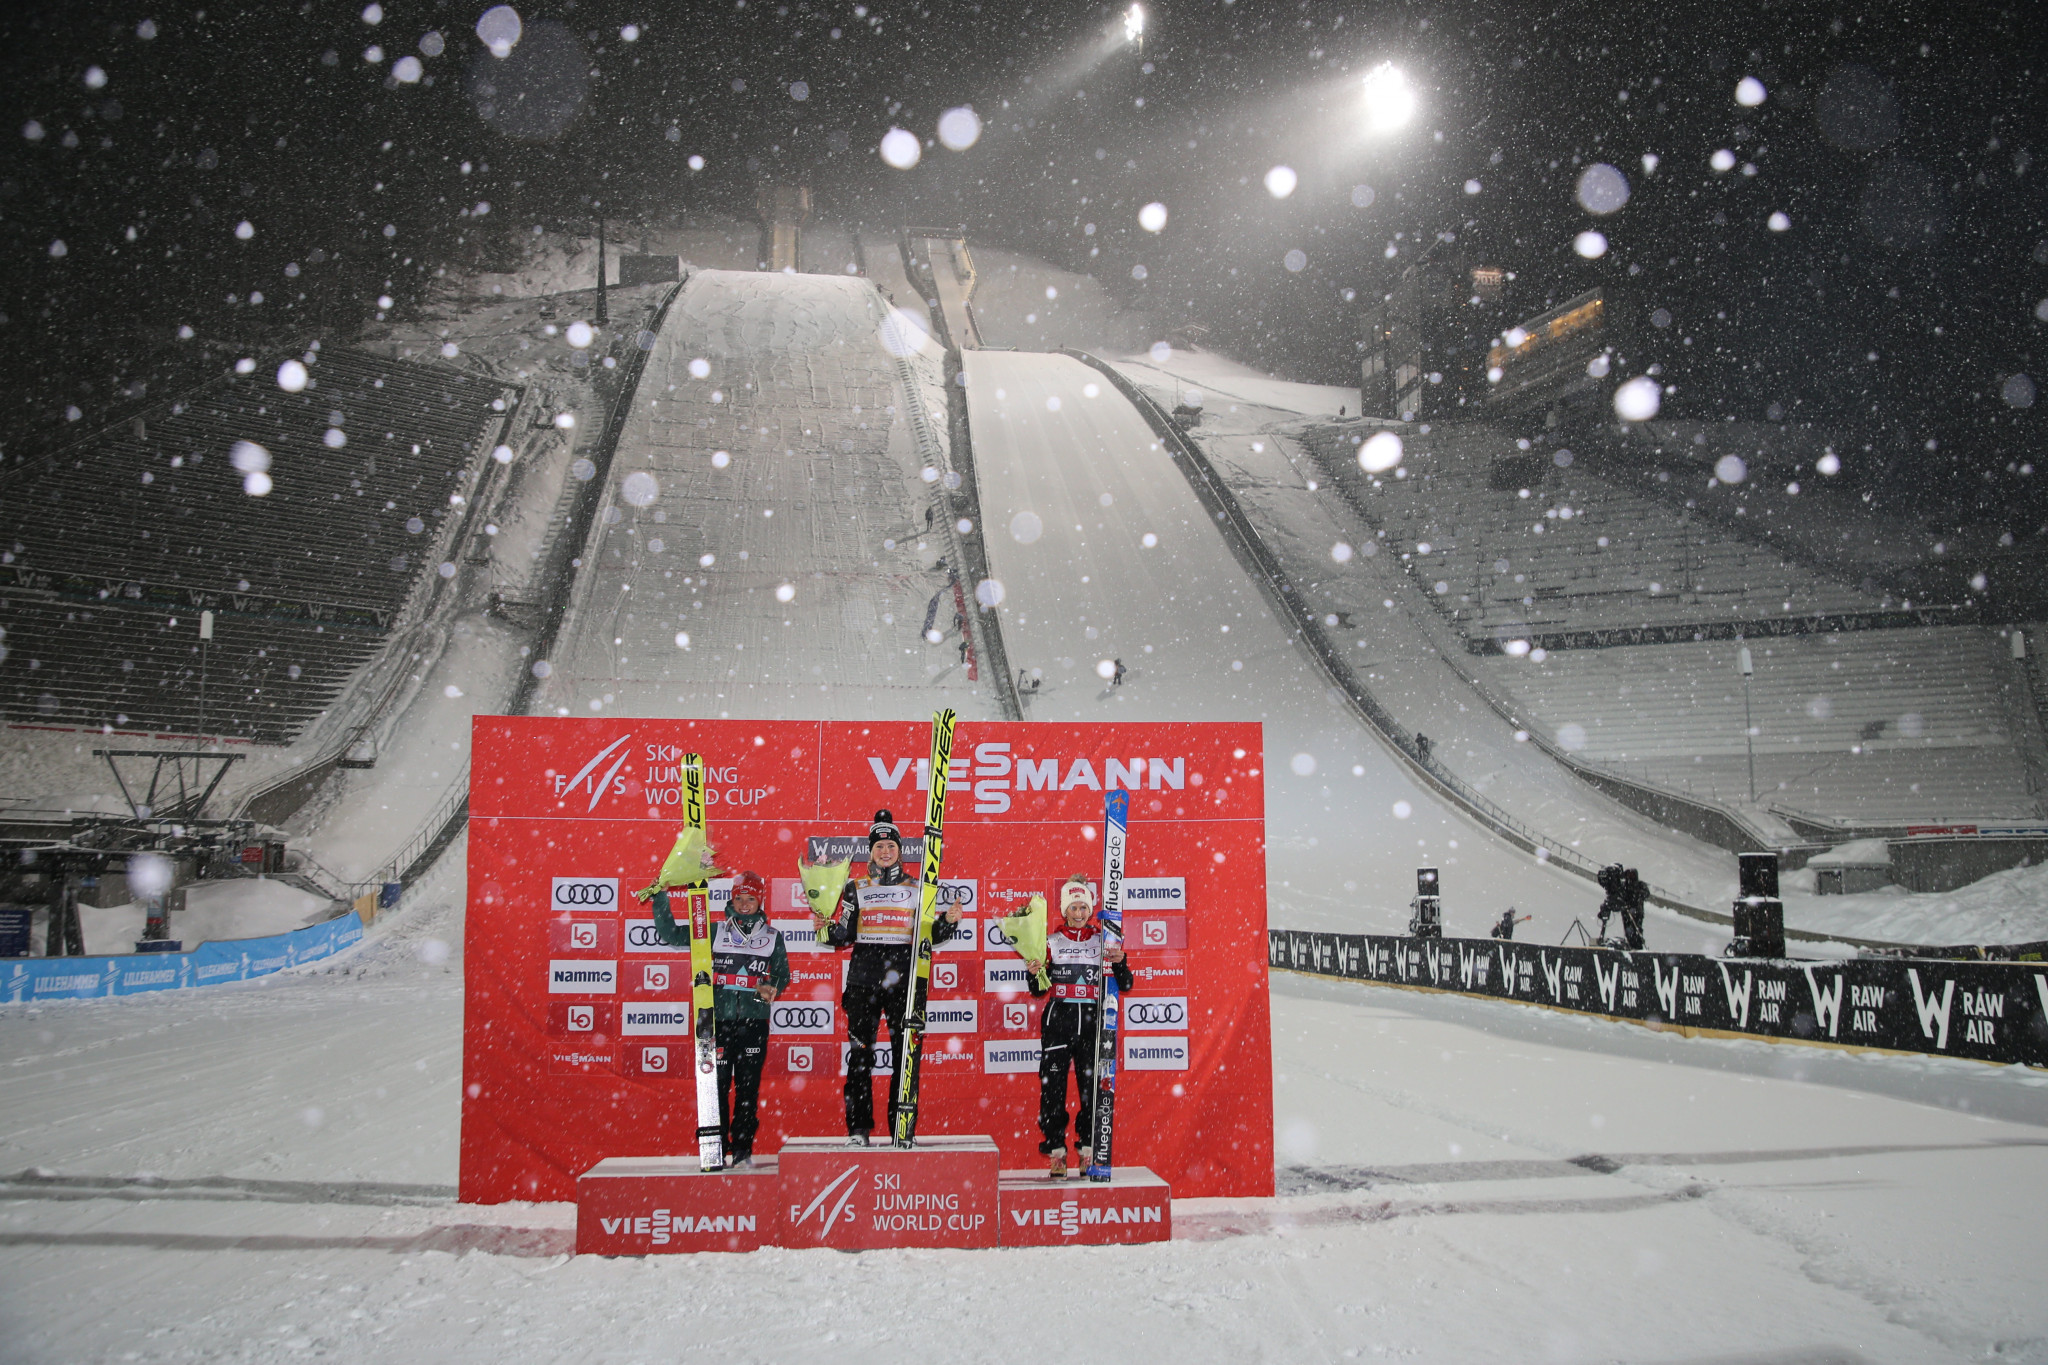 Prize money increased for athletes on women's FIS Ski Jumping World Cup tour